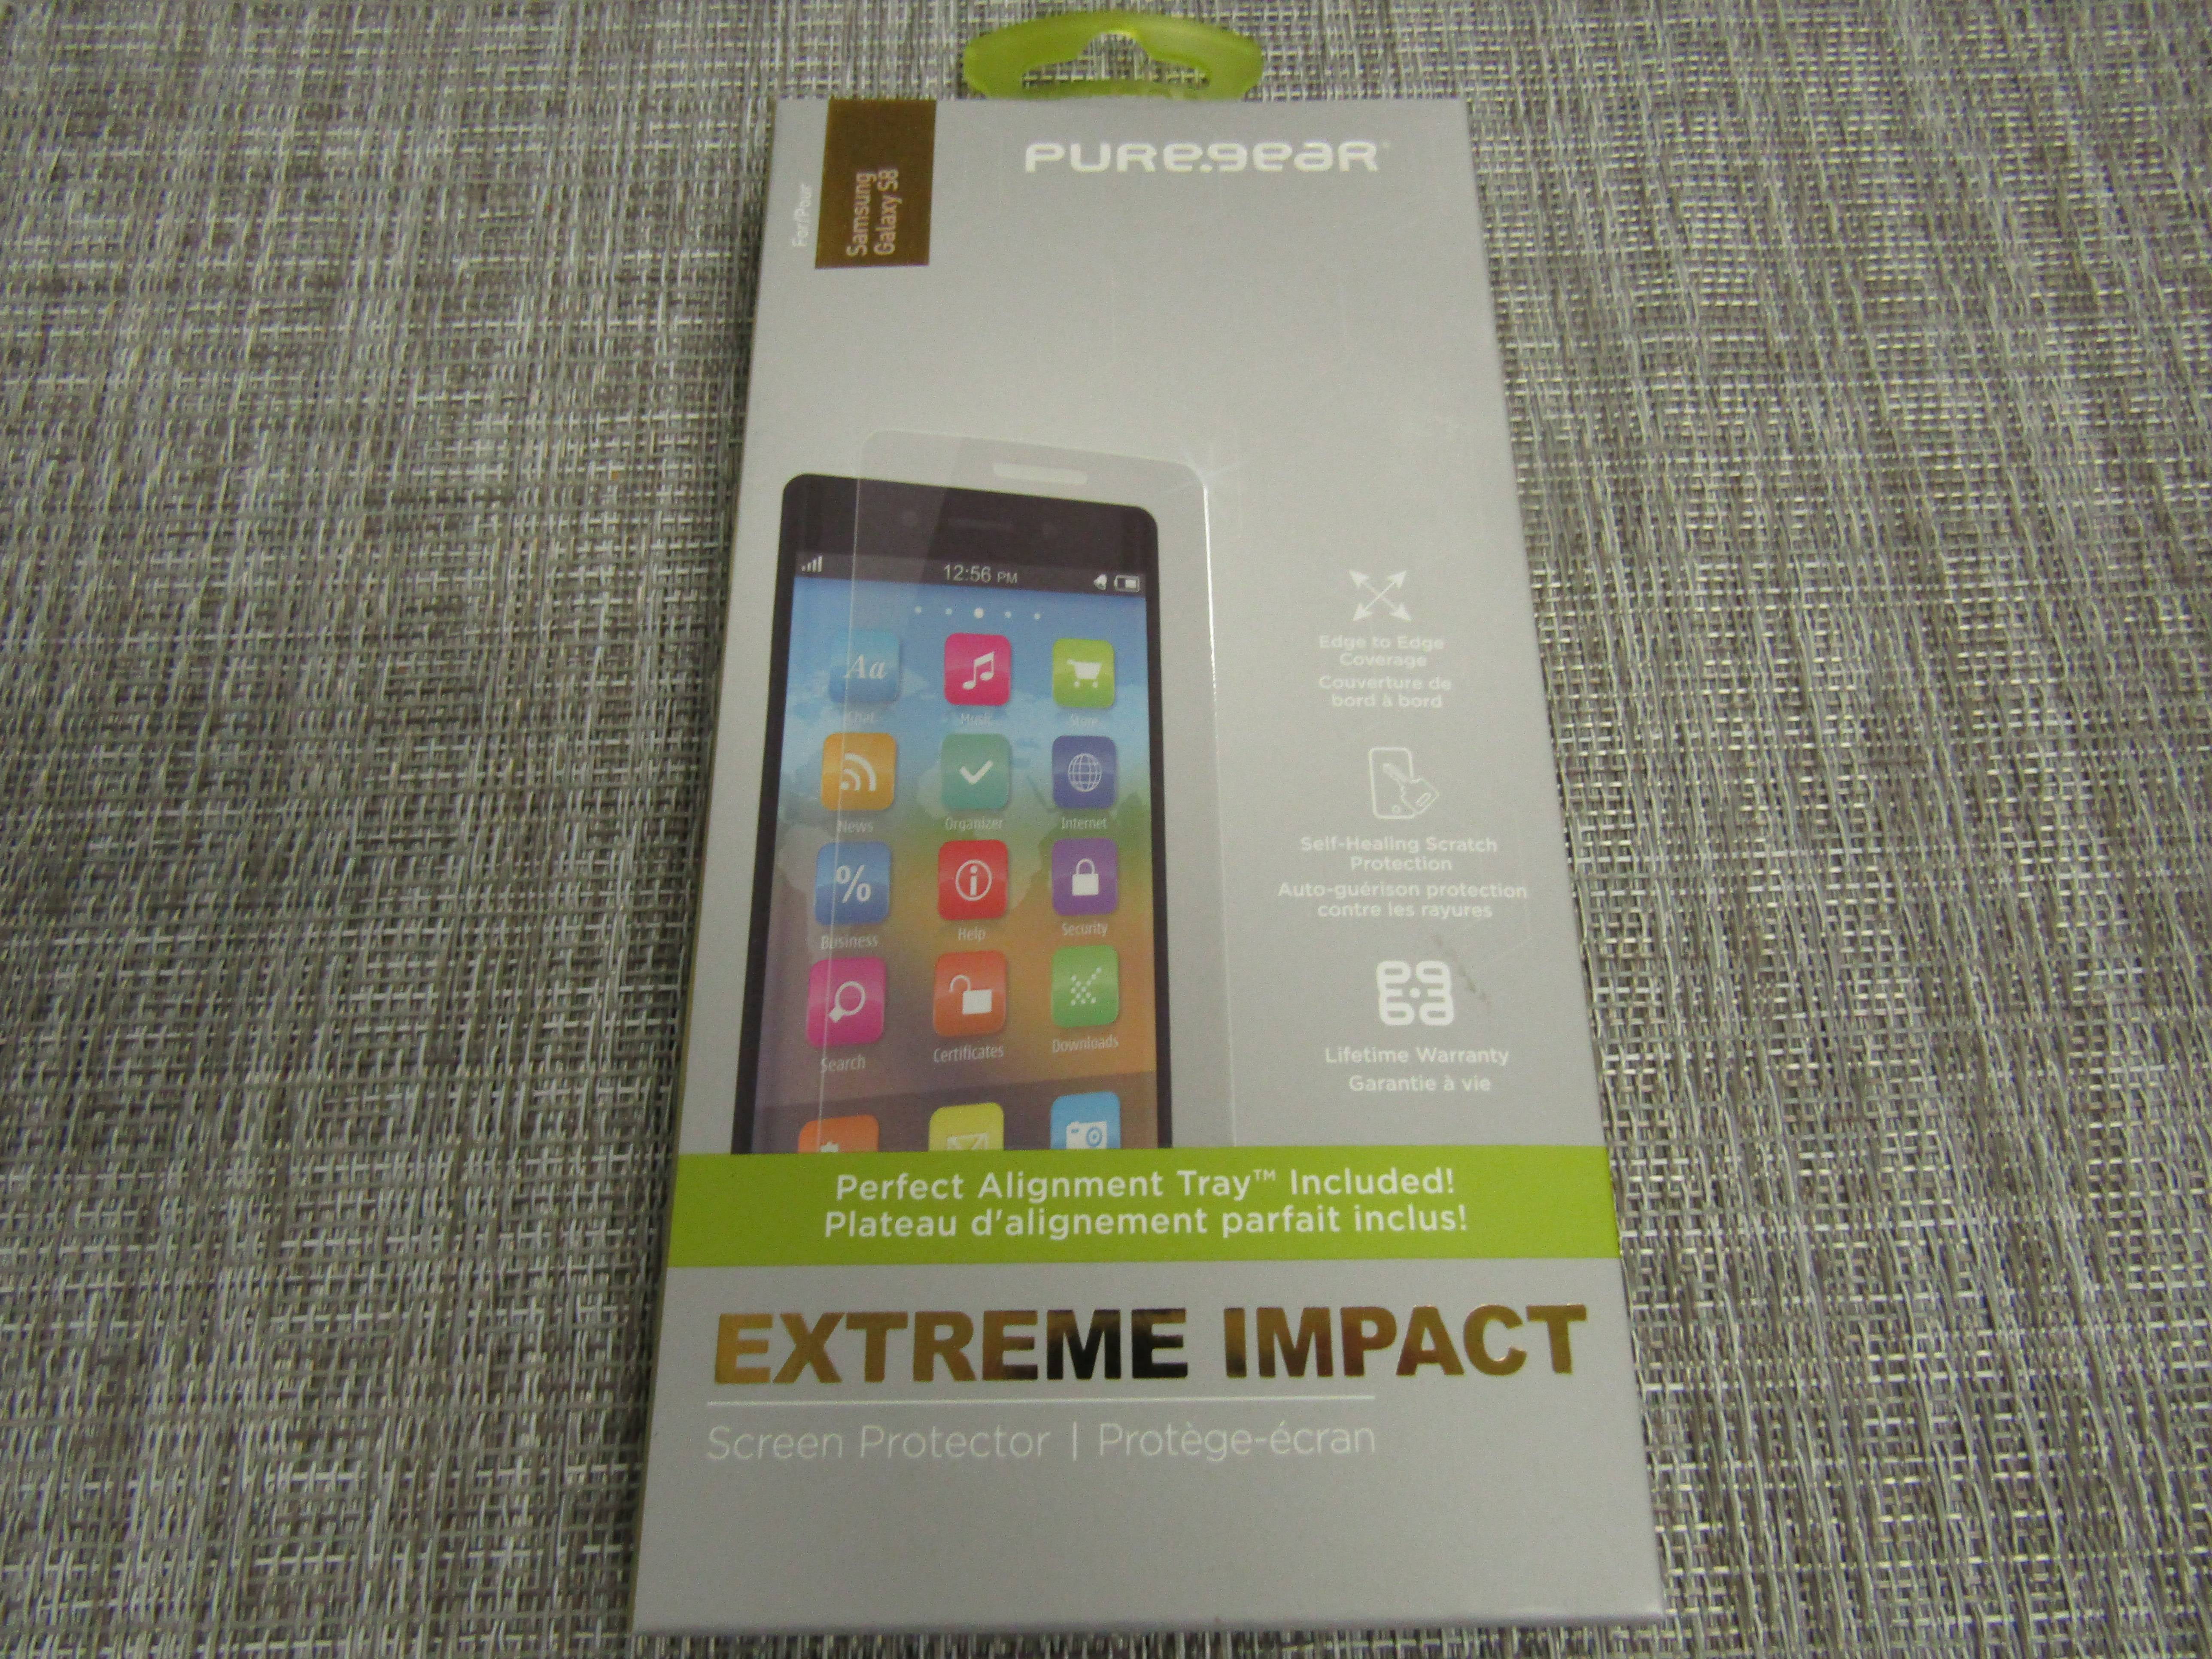 Puregear Extreme Impact Screen Protector For The Samsung Galaxy S8 Walmartcom